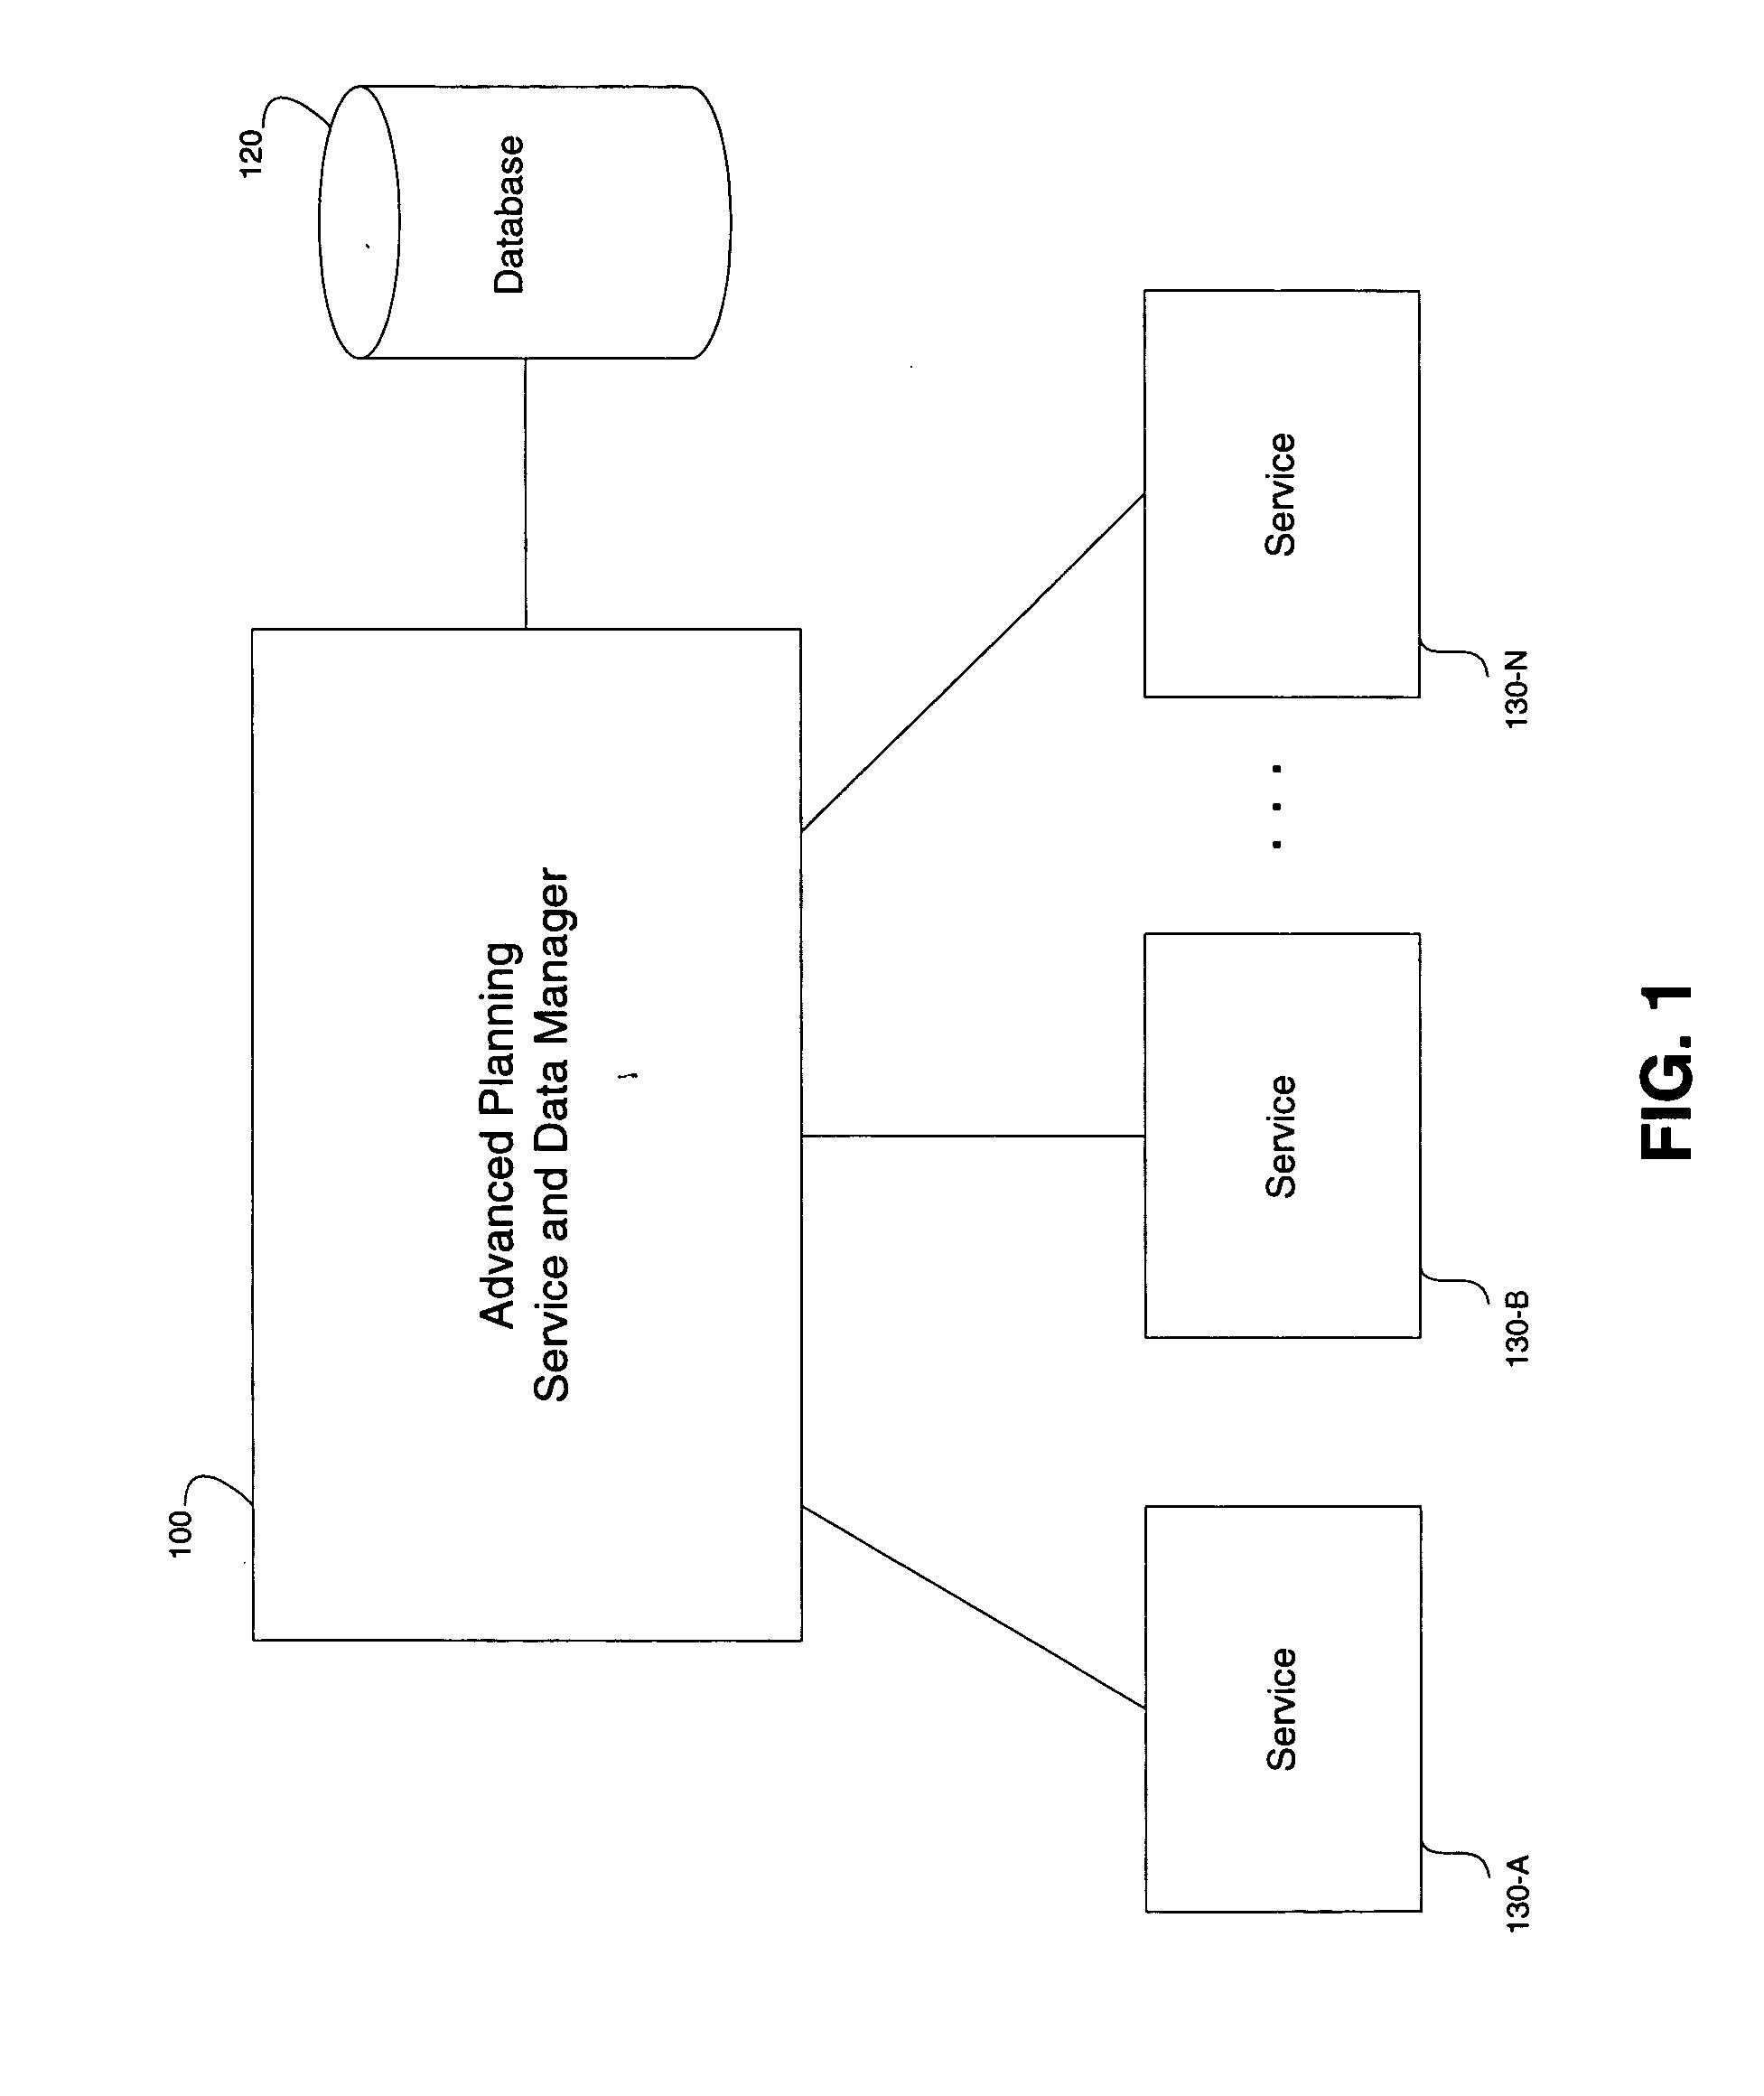 Systems and methods for managing the execution of services